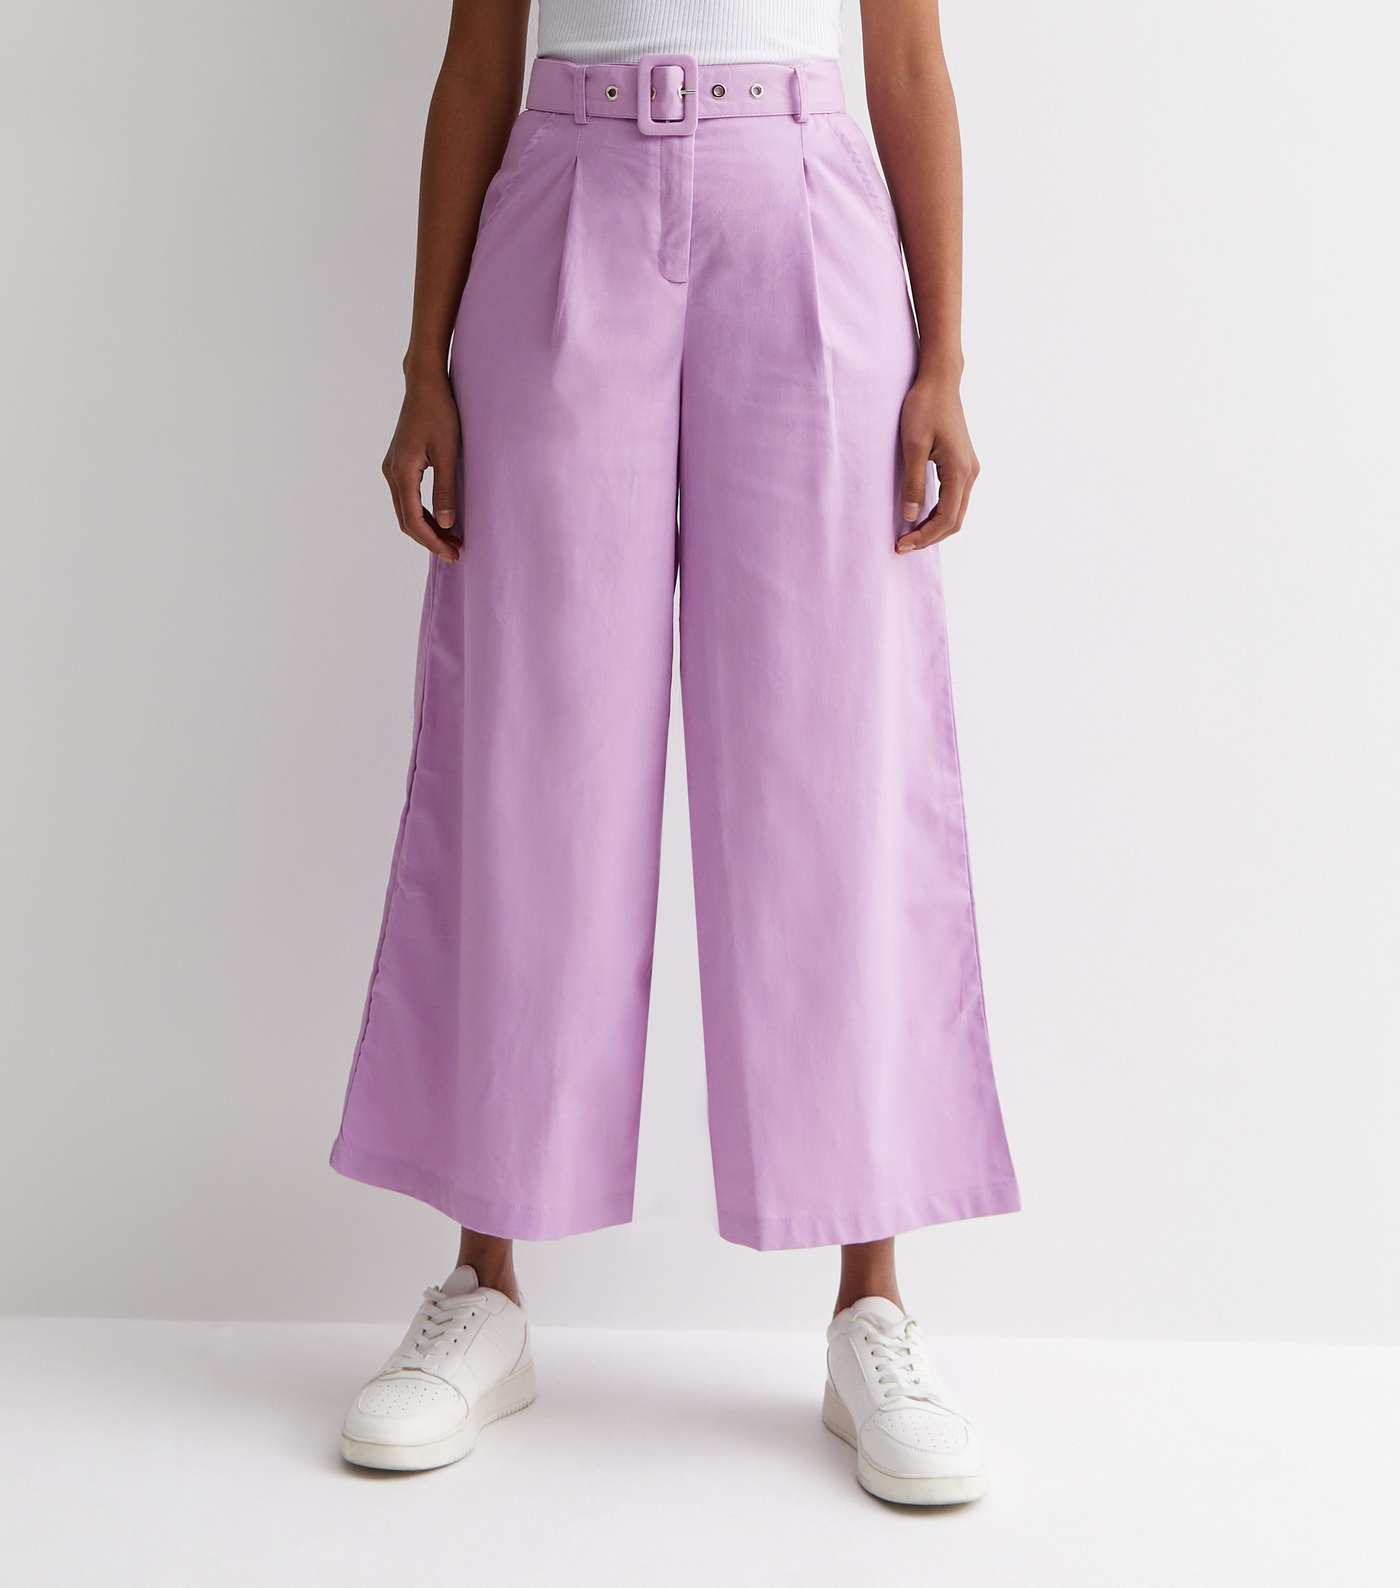 Gini London Lilac Linen-Look Belted Wide Leg Trousers Image 3